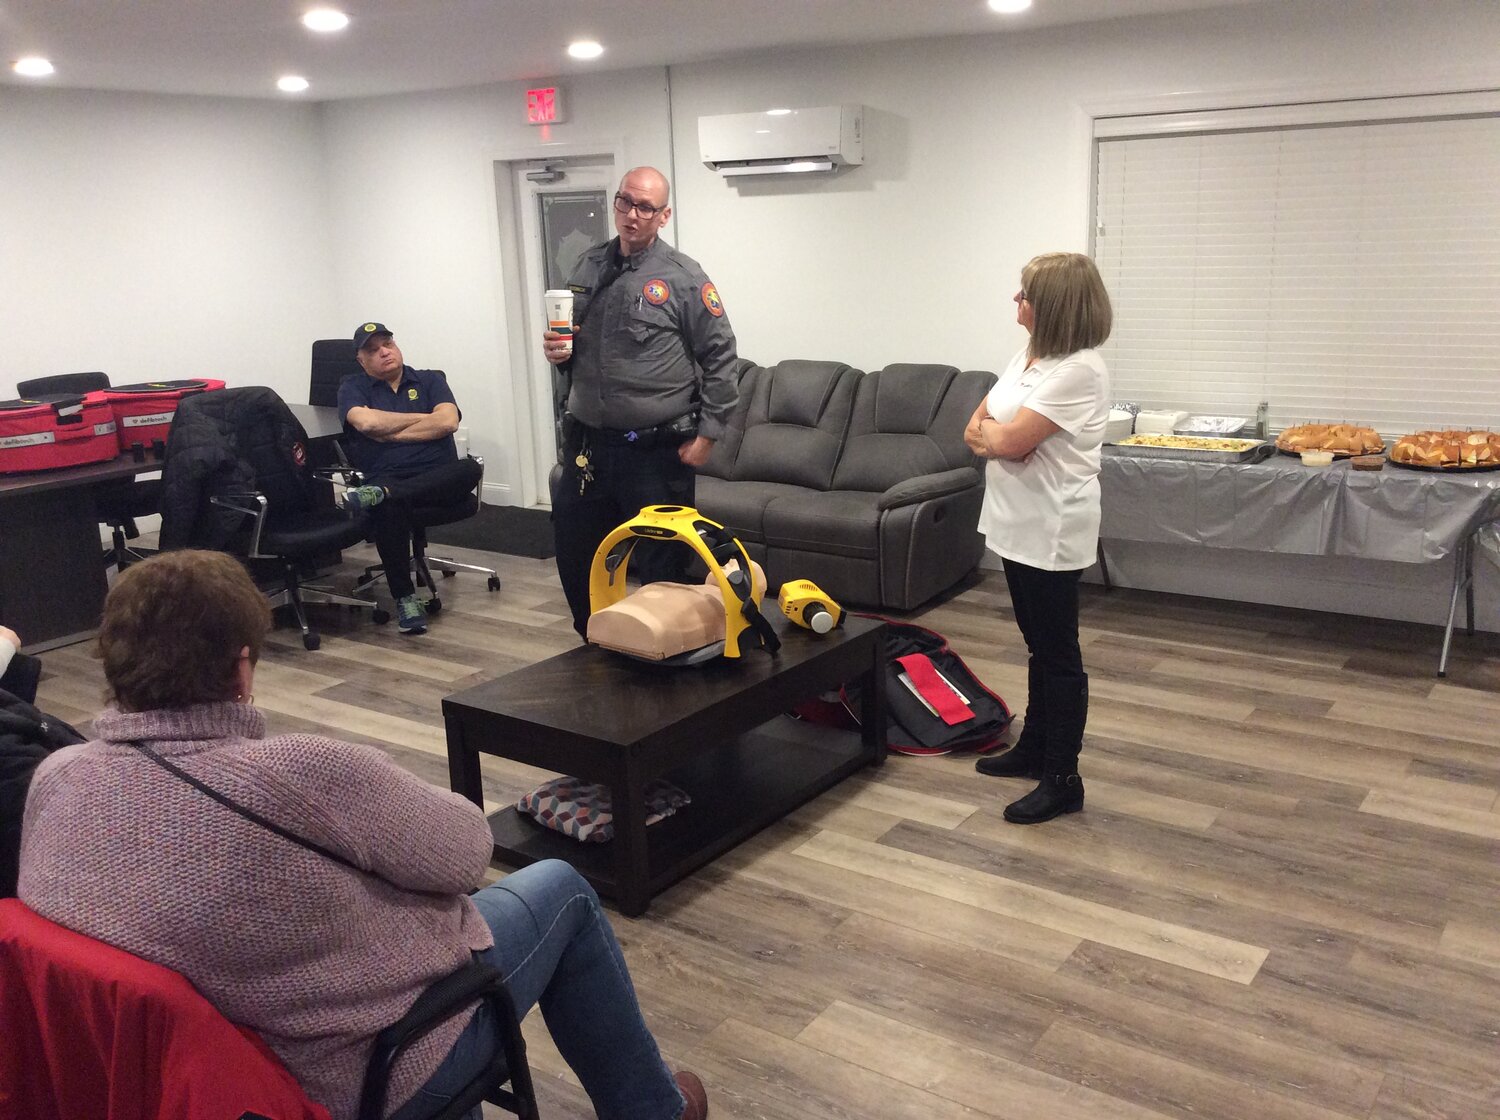 Debbi Vitelli and Nassau County police medic supervisor William Rudnick presented the most effective ways to use the CPR machine.